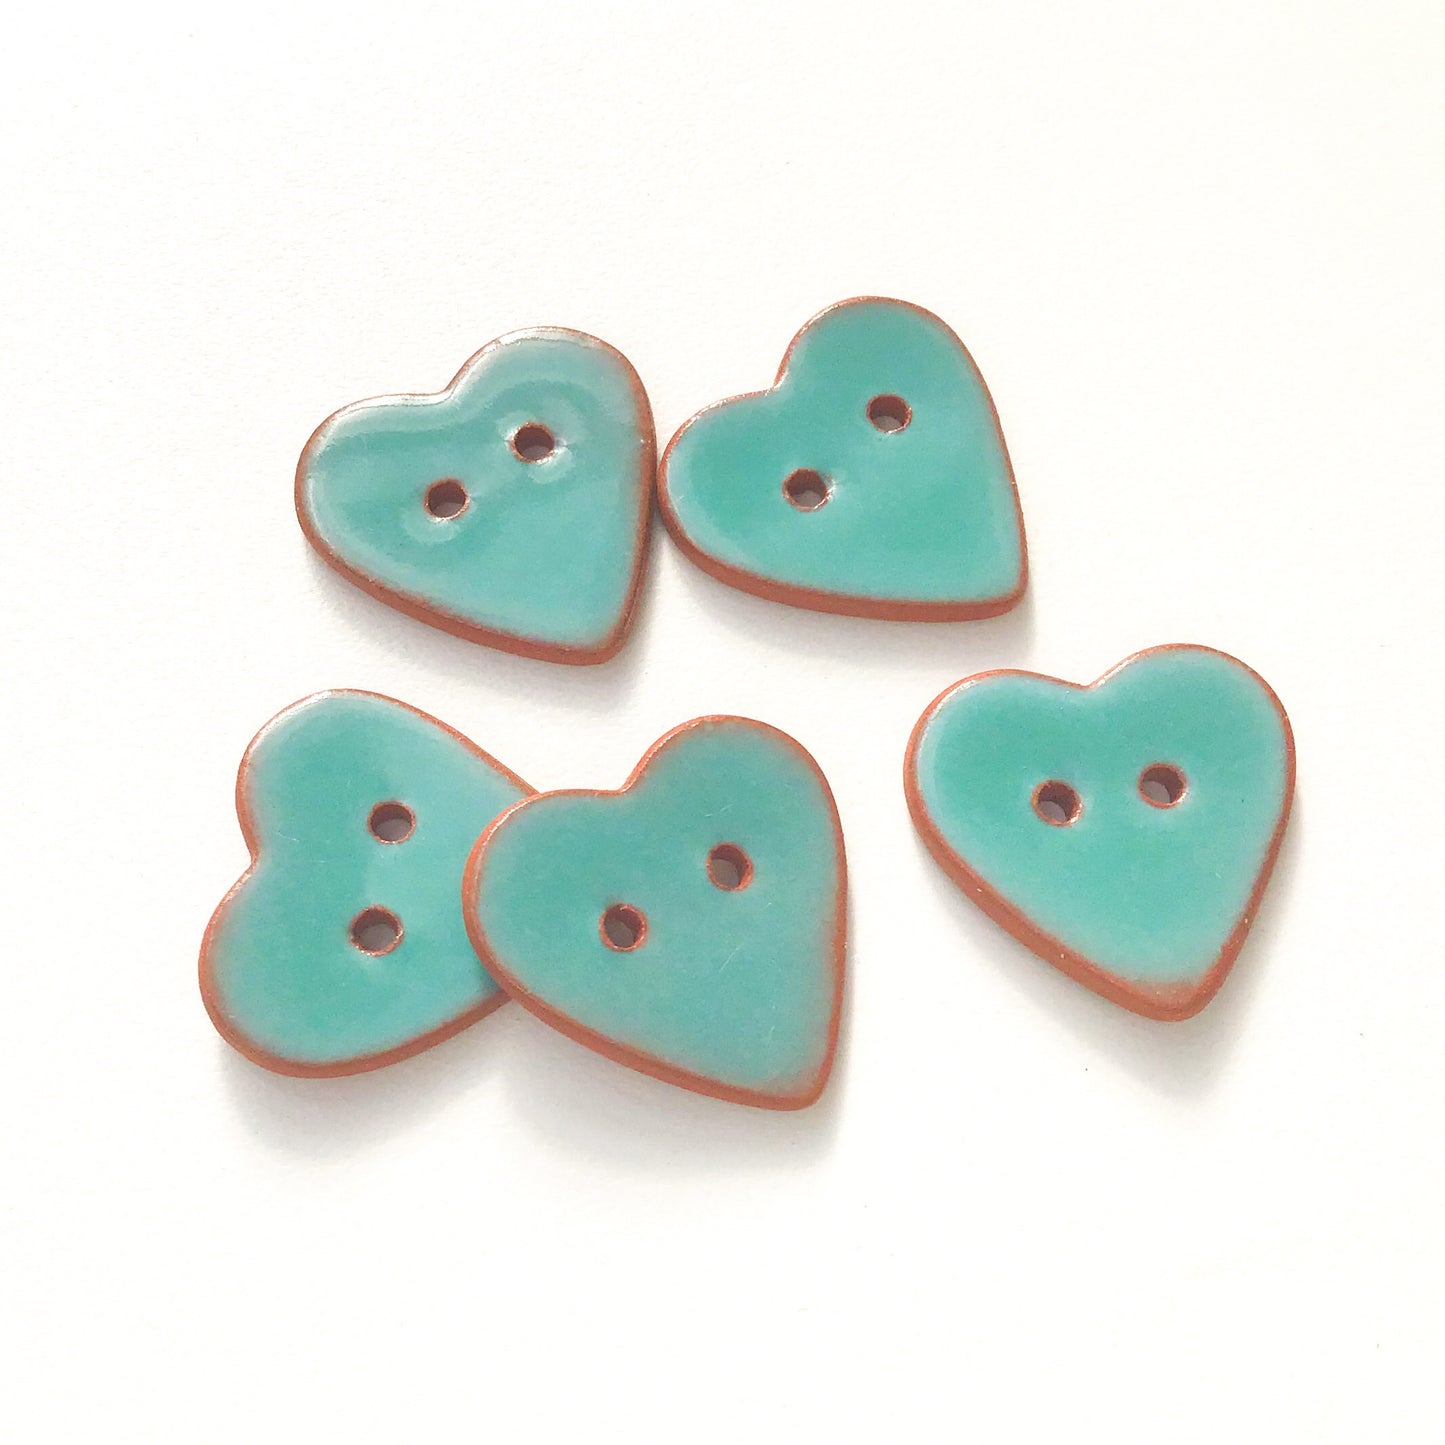 Turquoise Heart Buttons - Ceramic Heart Buttons - 7/8" (ws-257)